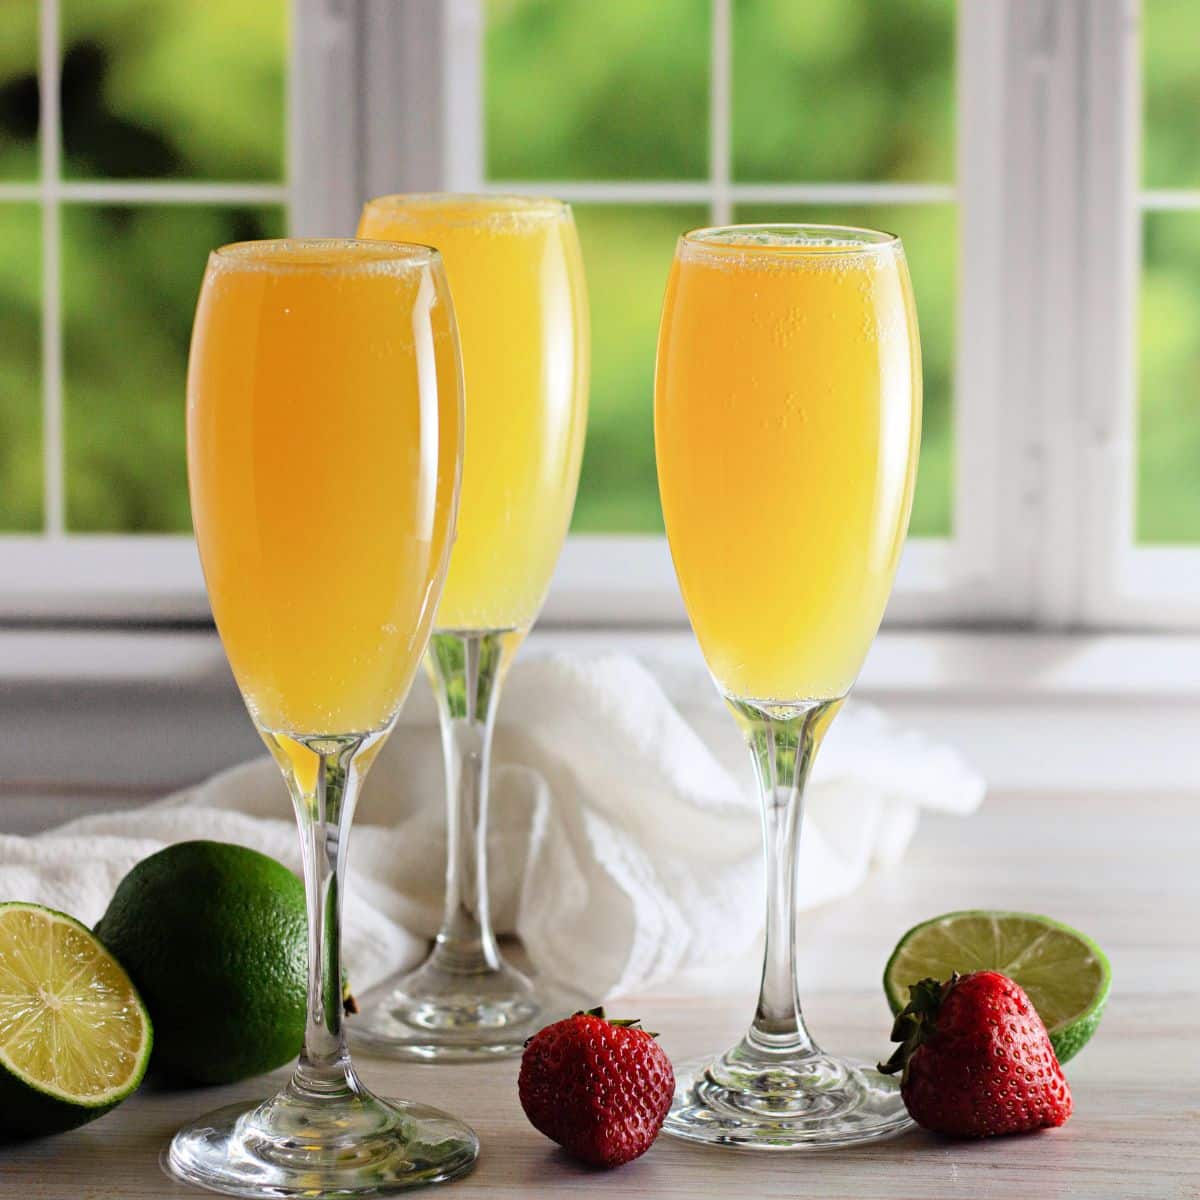 How to Make a Mimosa Like a Pro